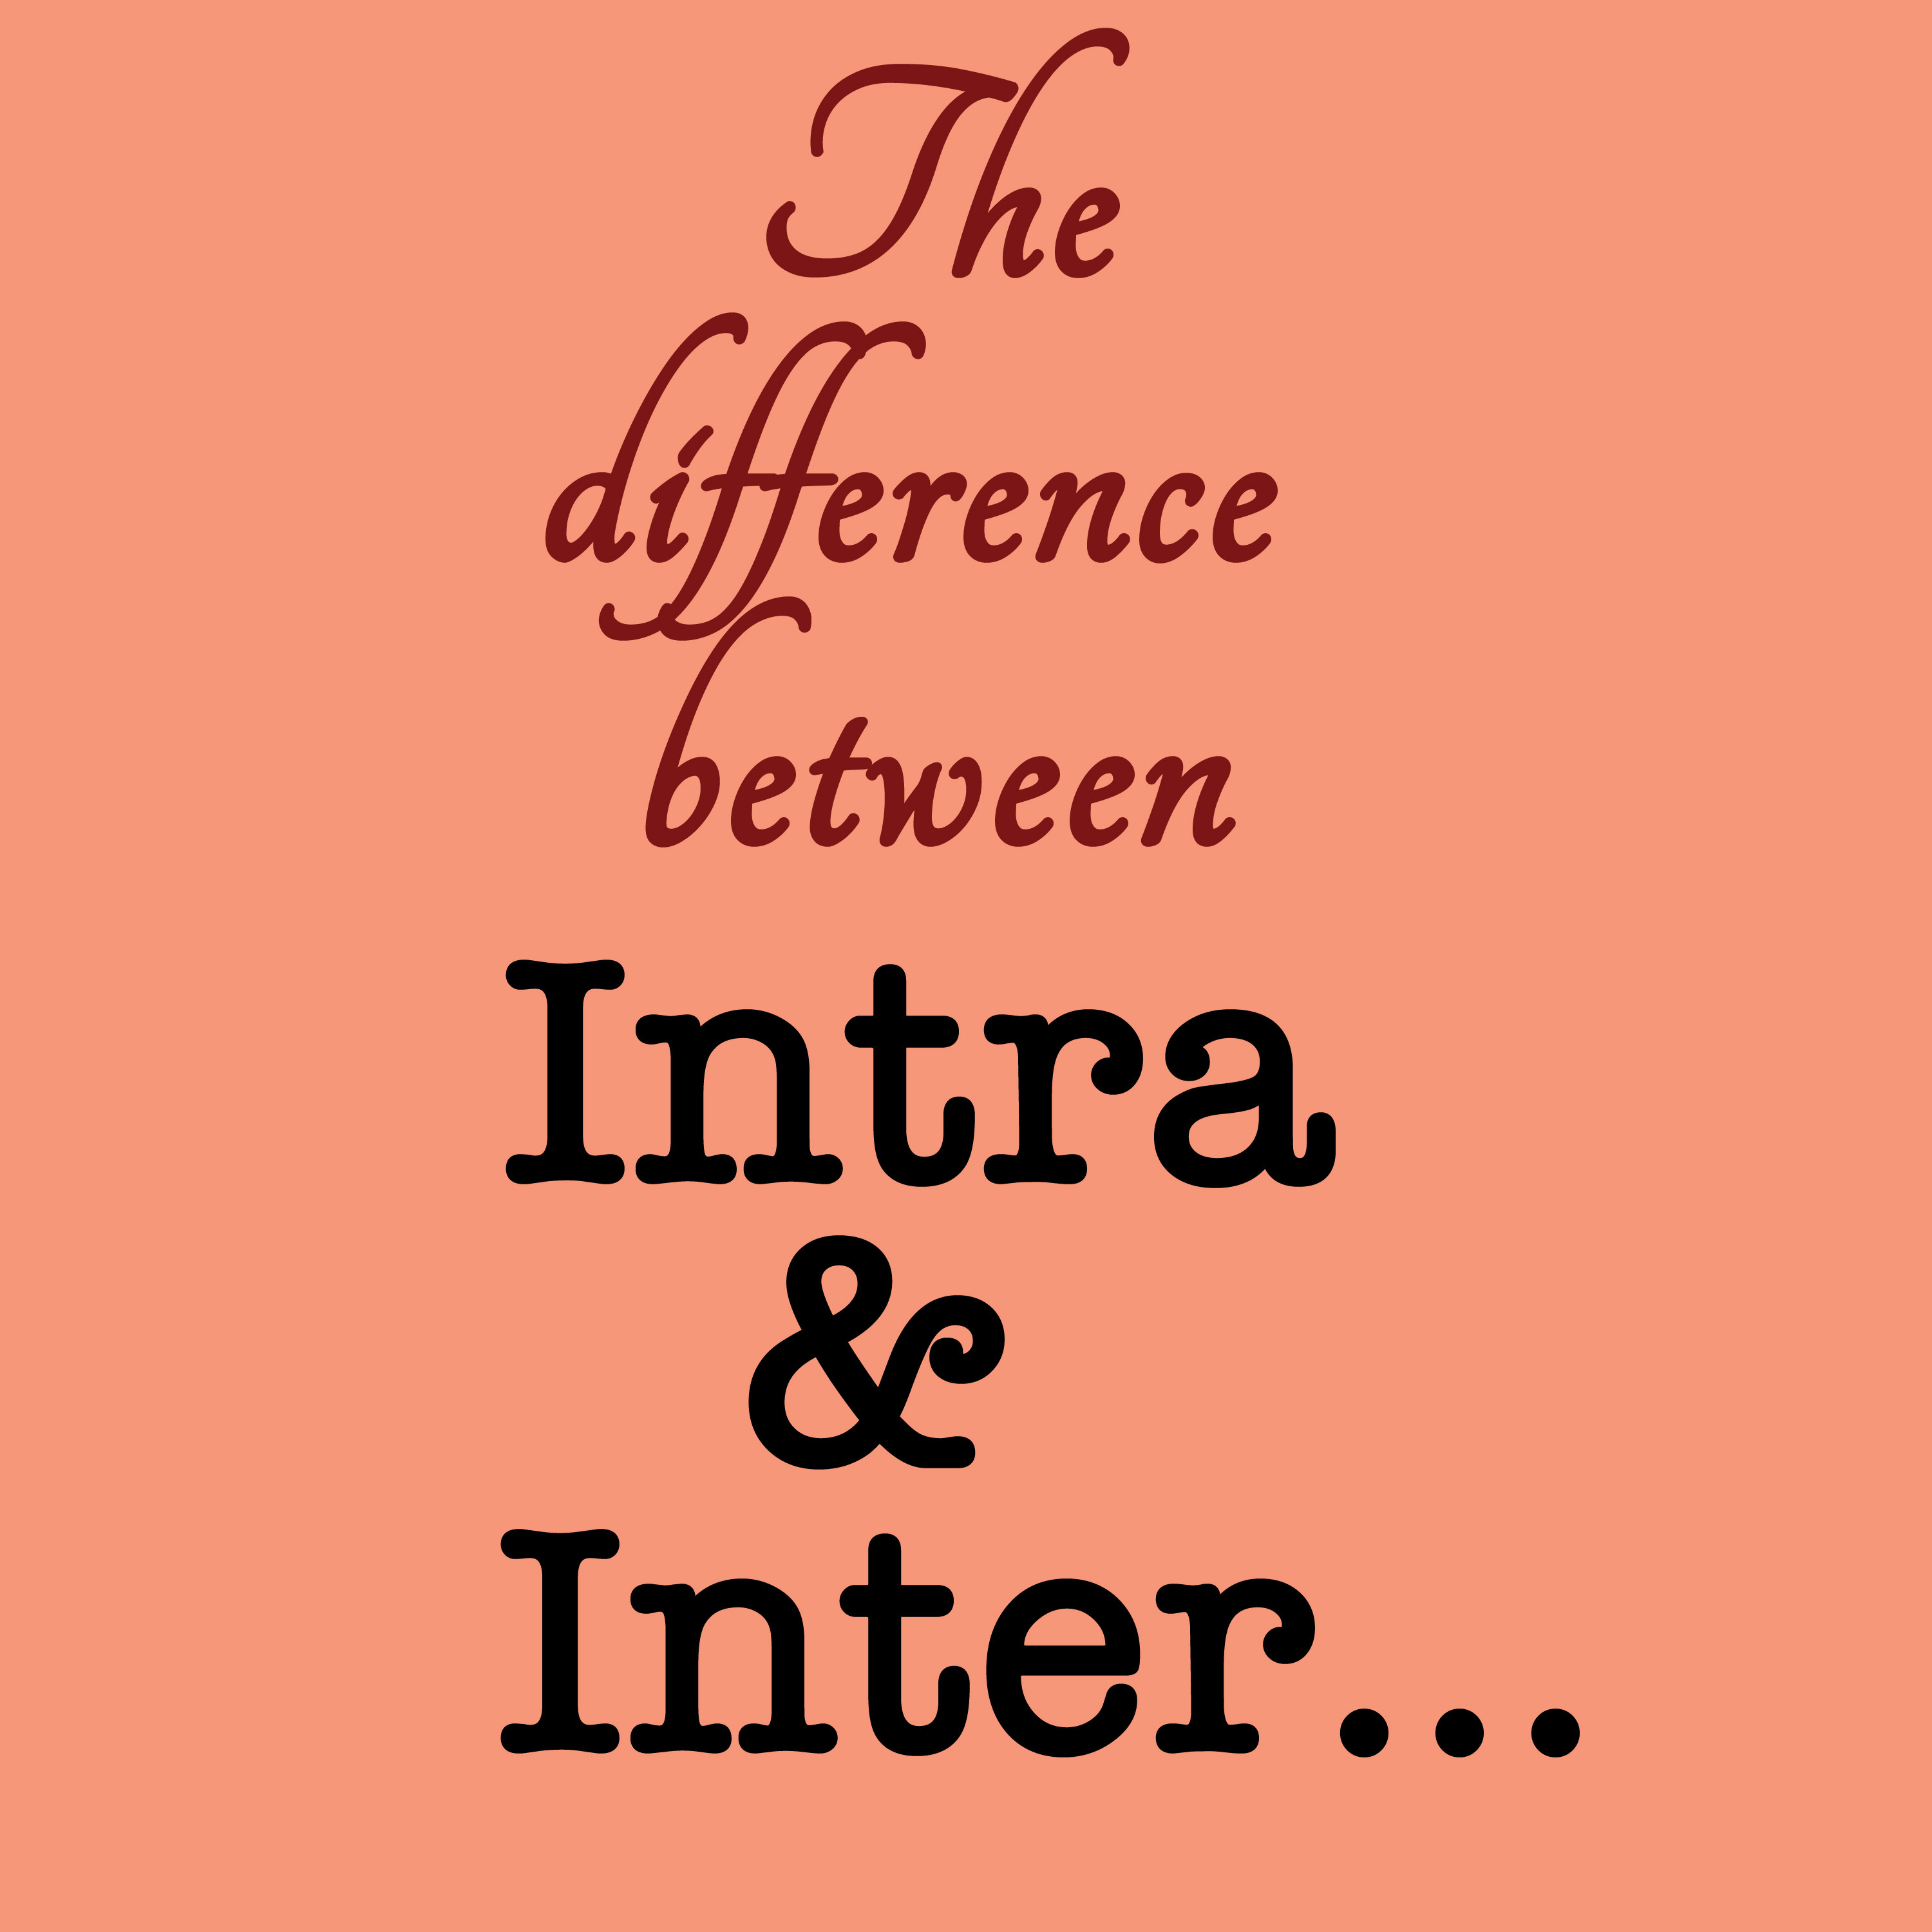 The difference between intra and inter ...